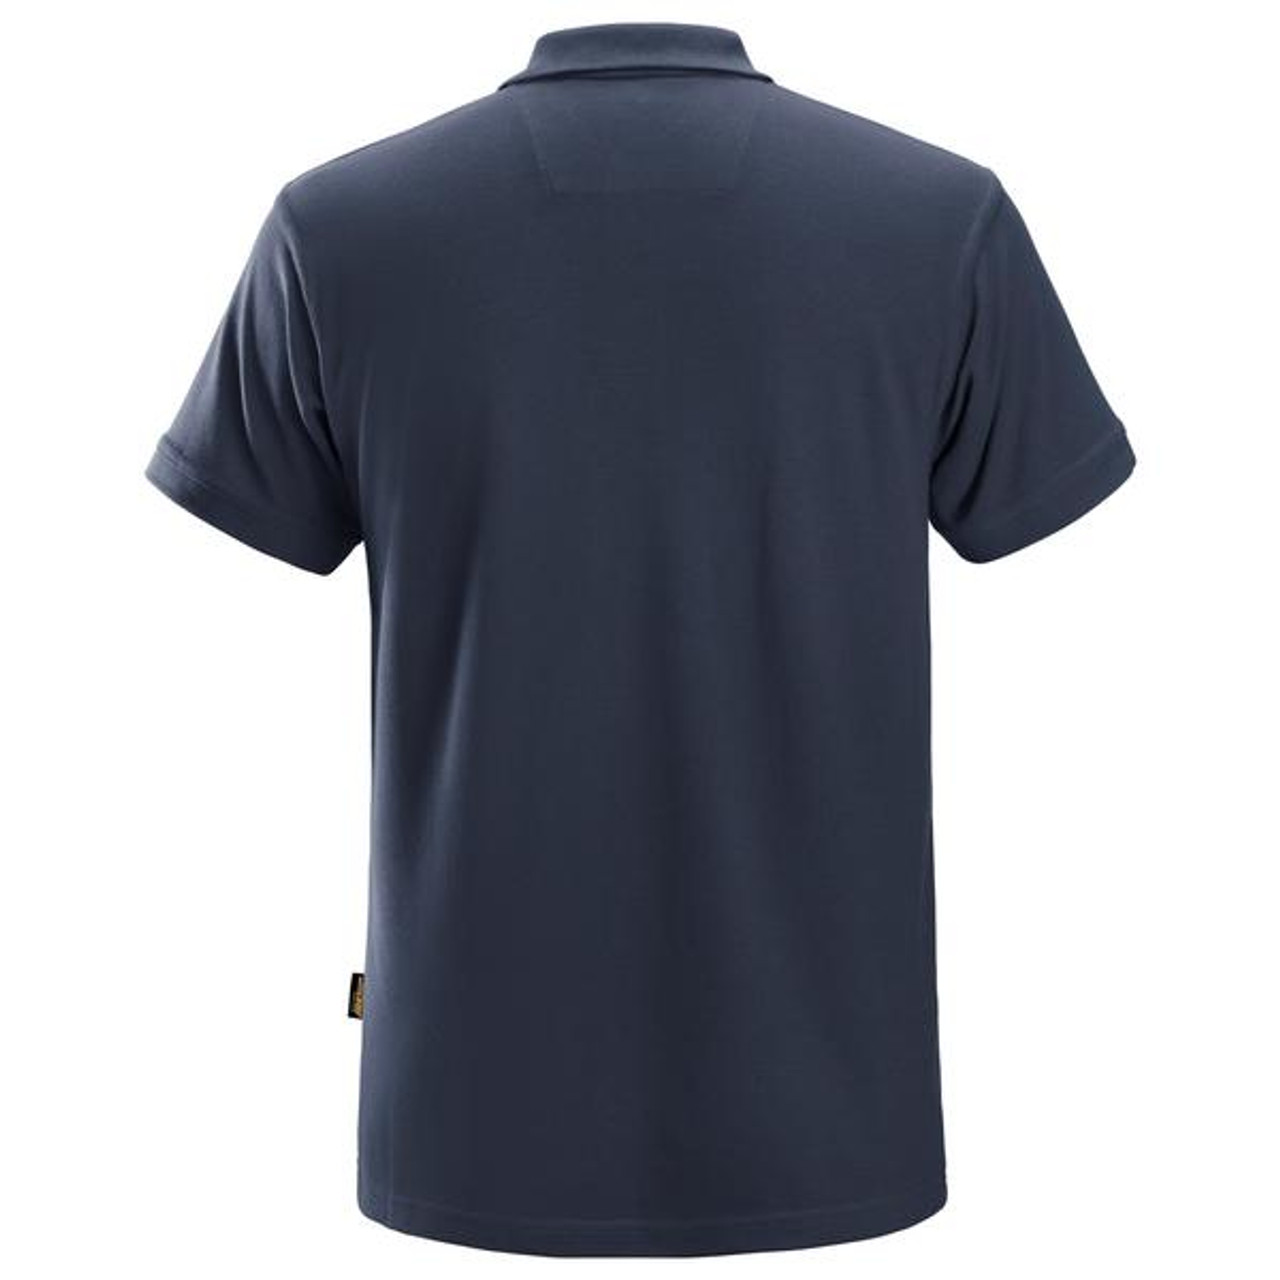 SNICKERS Sweater | Melbourne Supplier of 2708 Navy Blue Classic for Work Shirts, Uniforms on Demand, Branded Workwear, Work Uniforms and Heat Transfers